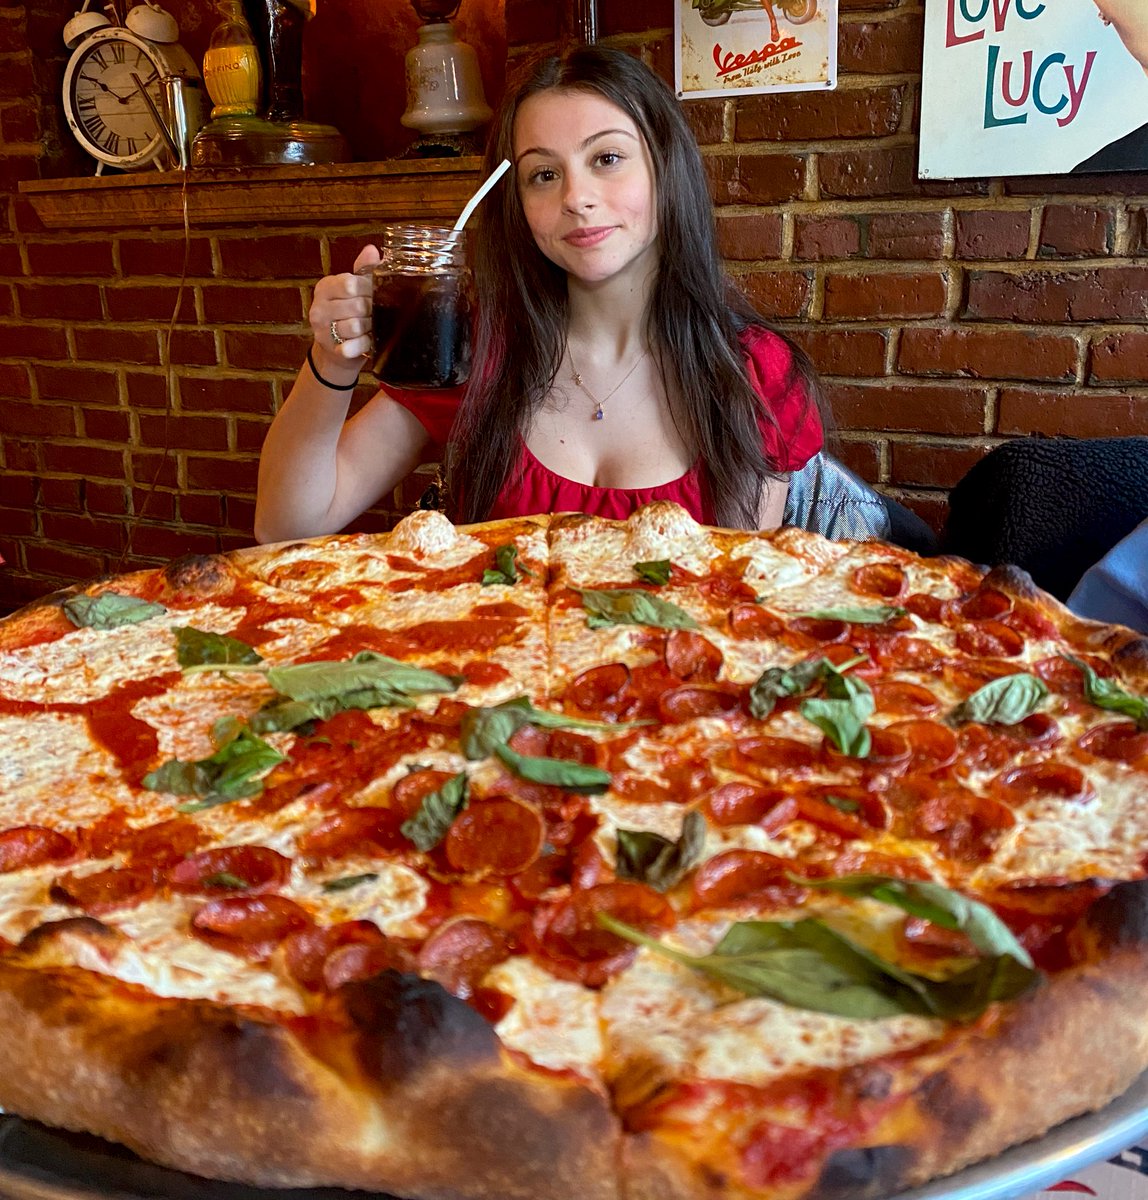 For $5,000 can you eat this whole pizza pie in one sitting? 🤭🍕